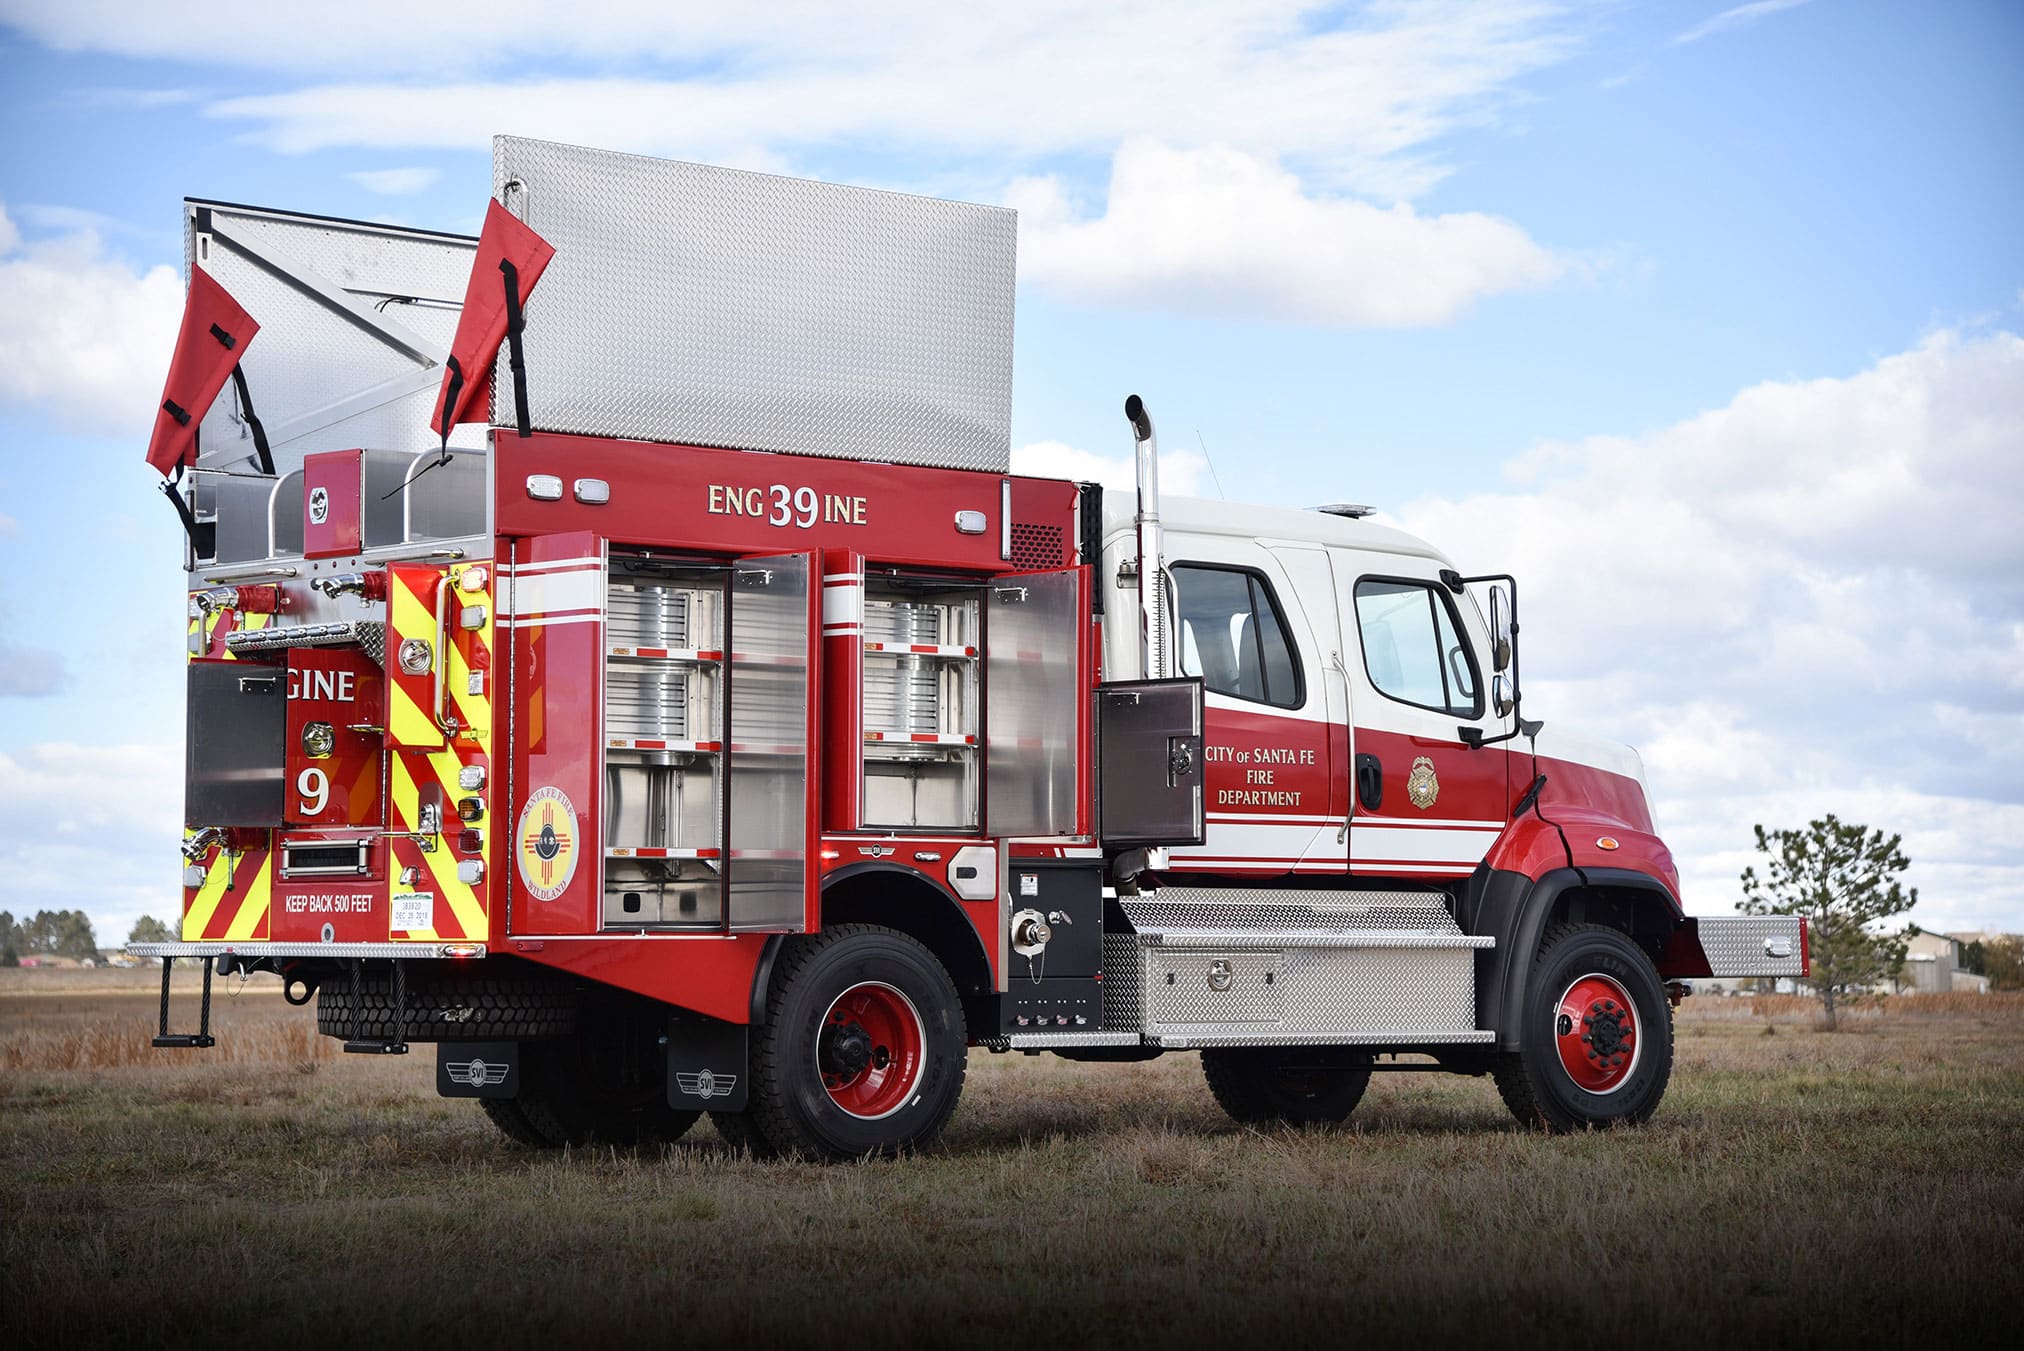 Featured image for “Santa Fe, New Mexico Fire Department Type 3 Wildland Engine #1052”